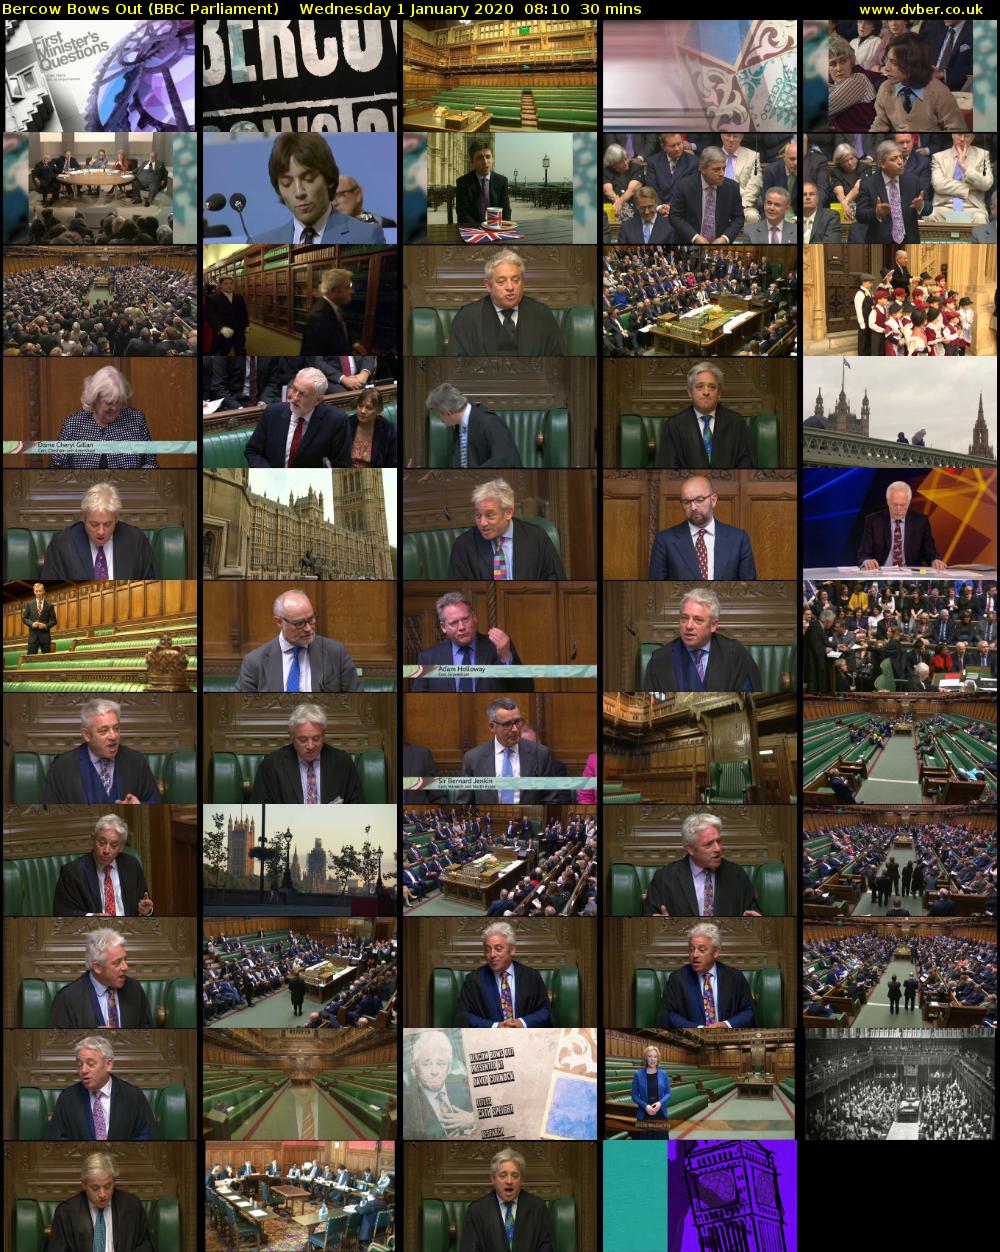 Bercow Bows Out (BBC Parliament) Wednesday 1 January 2020 08:10 - 08:40